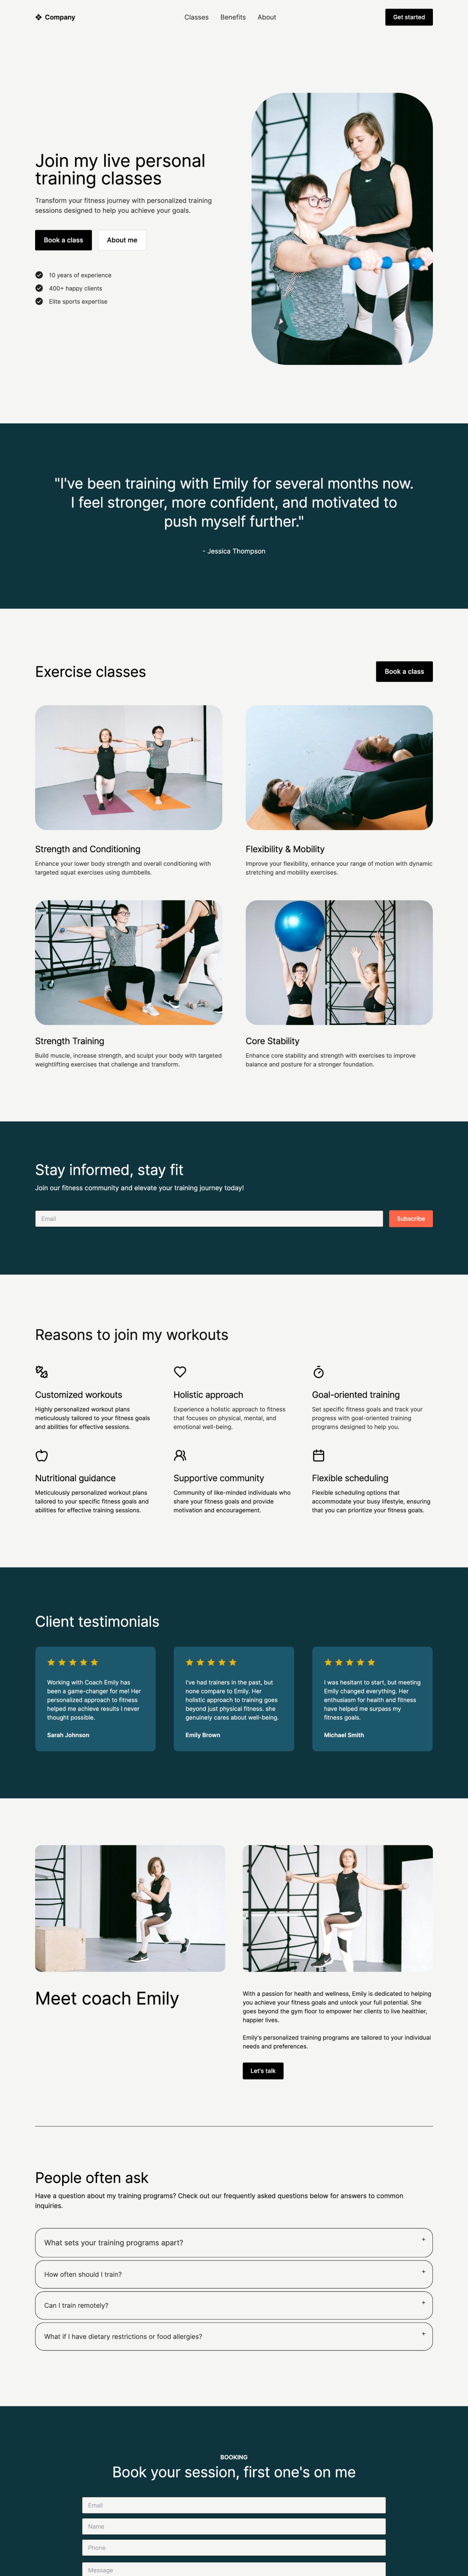 Personal trainer template - Made by MailerLite